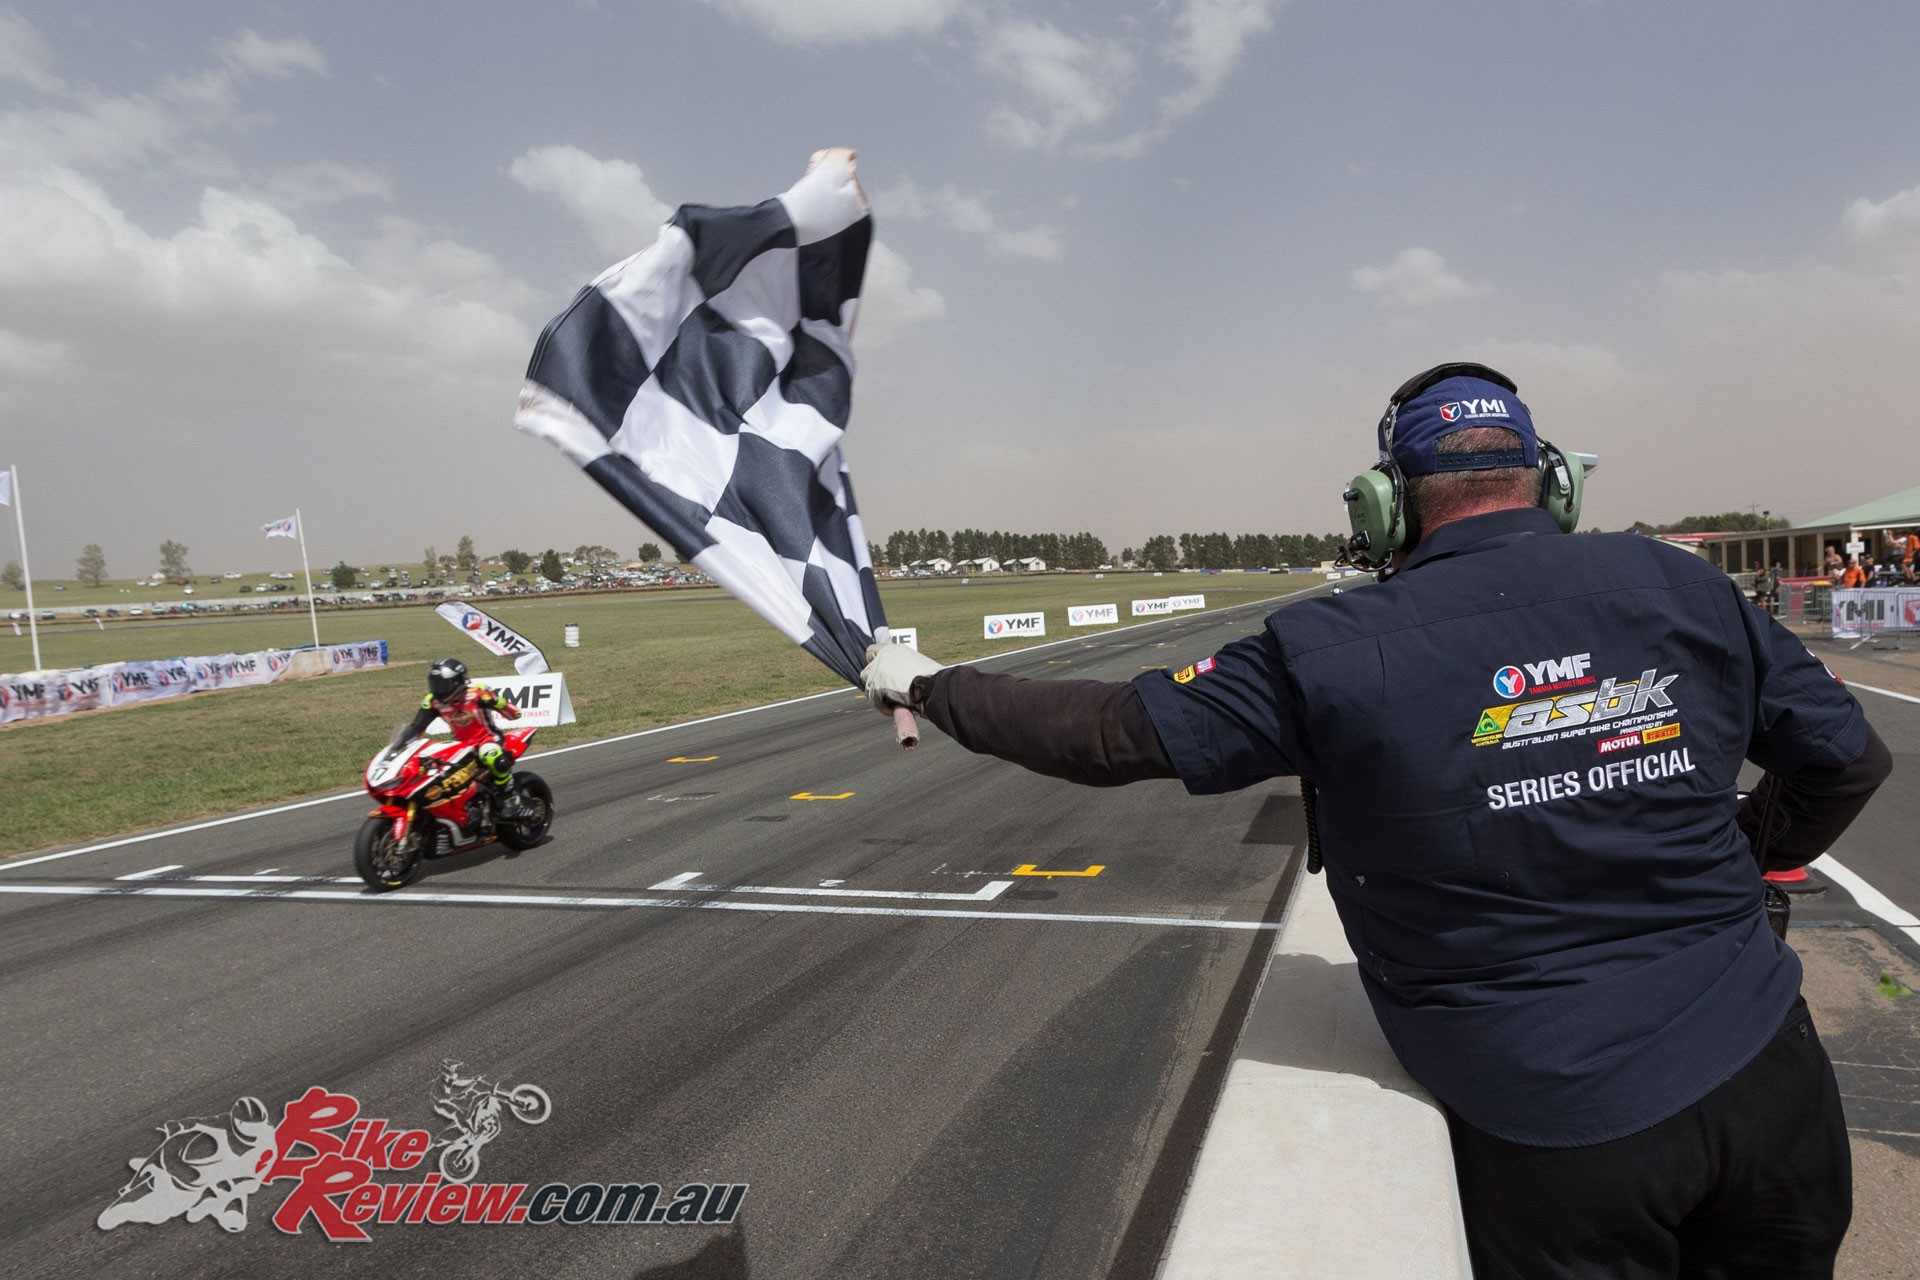 ASBK in 2019 will be aired on TV and available to watch online - Image by TBG